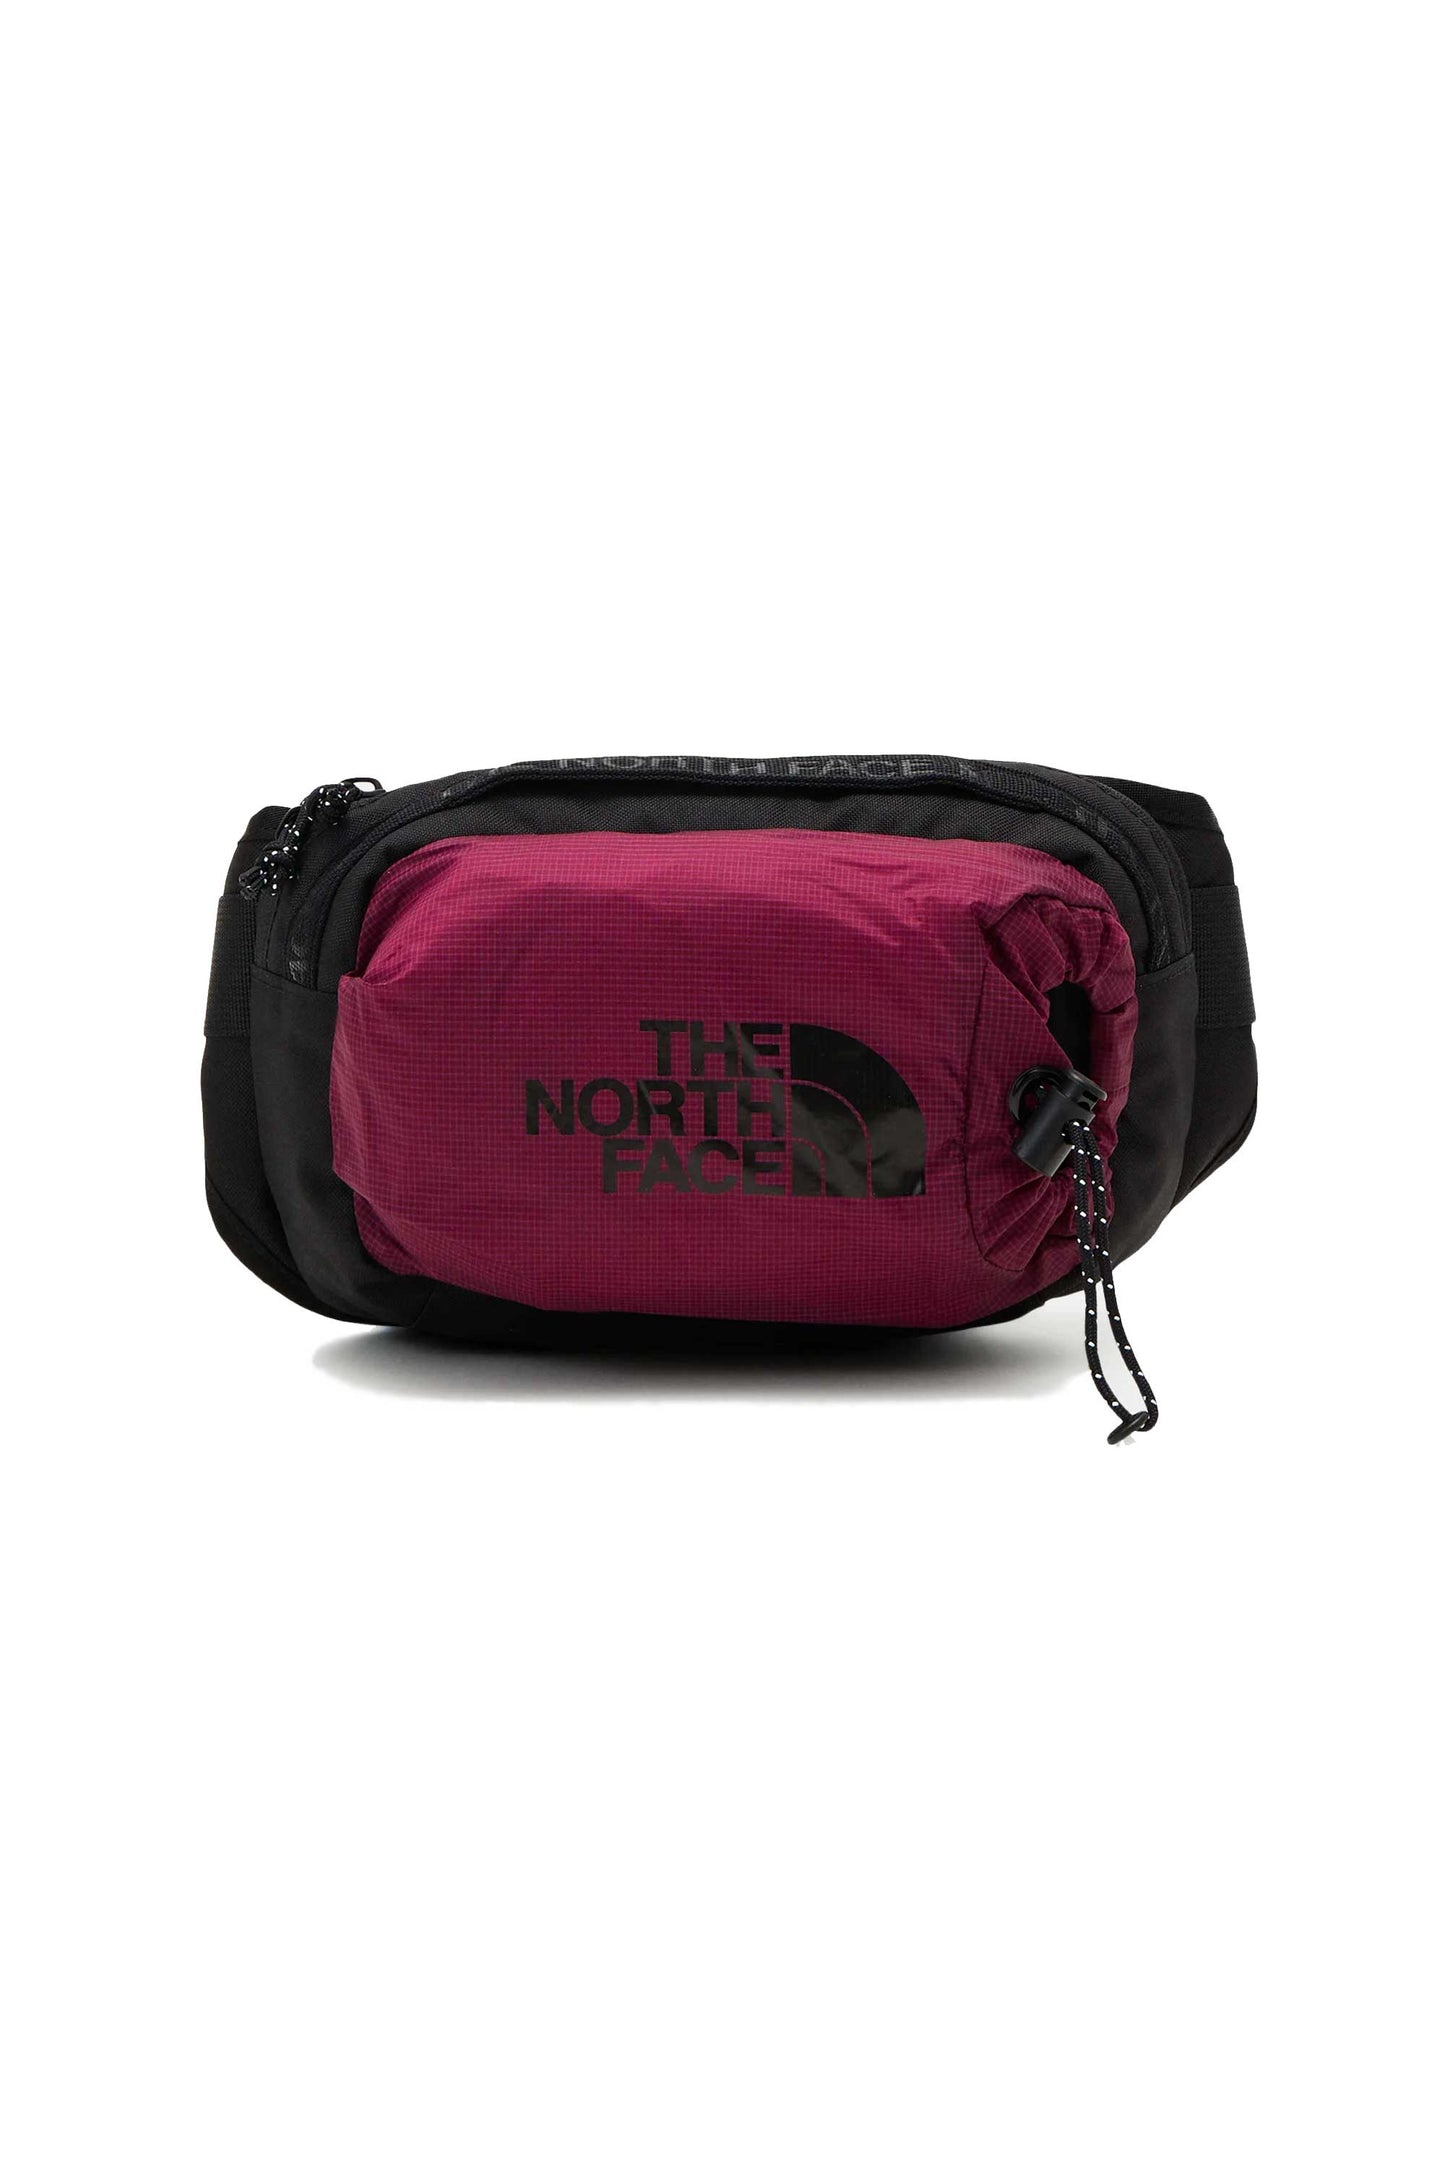 Pukas-Surf-Shop-the-north-face-bozer-hip-pack-iii-boysenberry